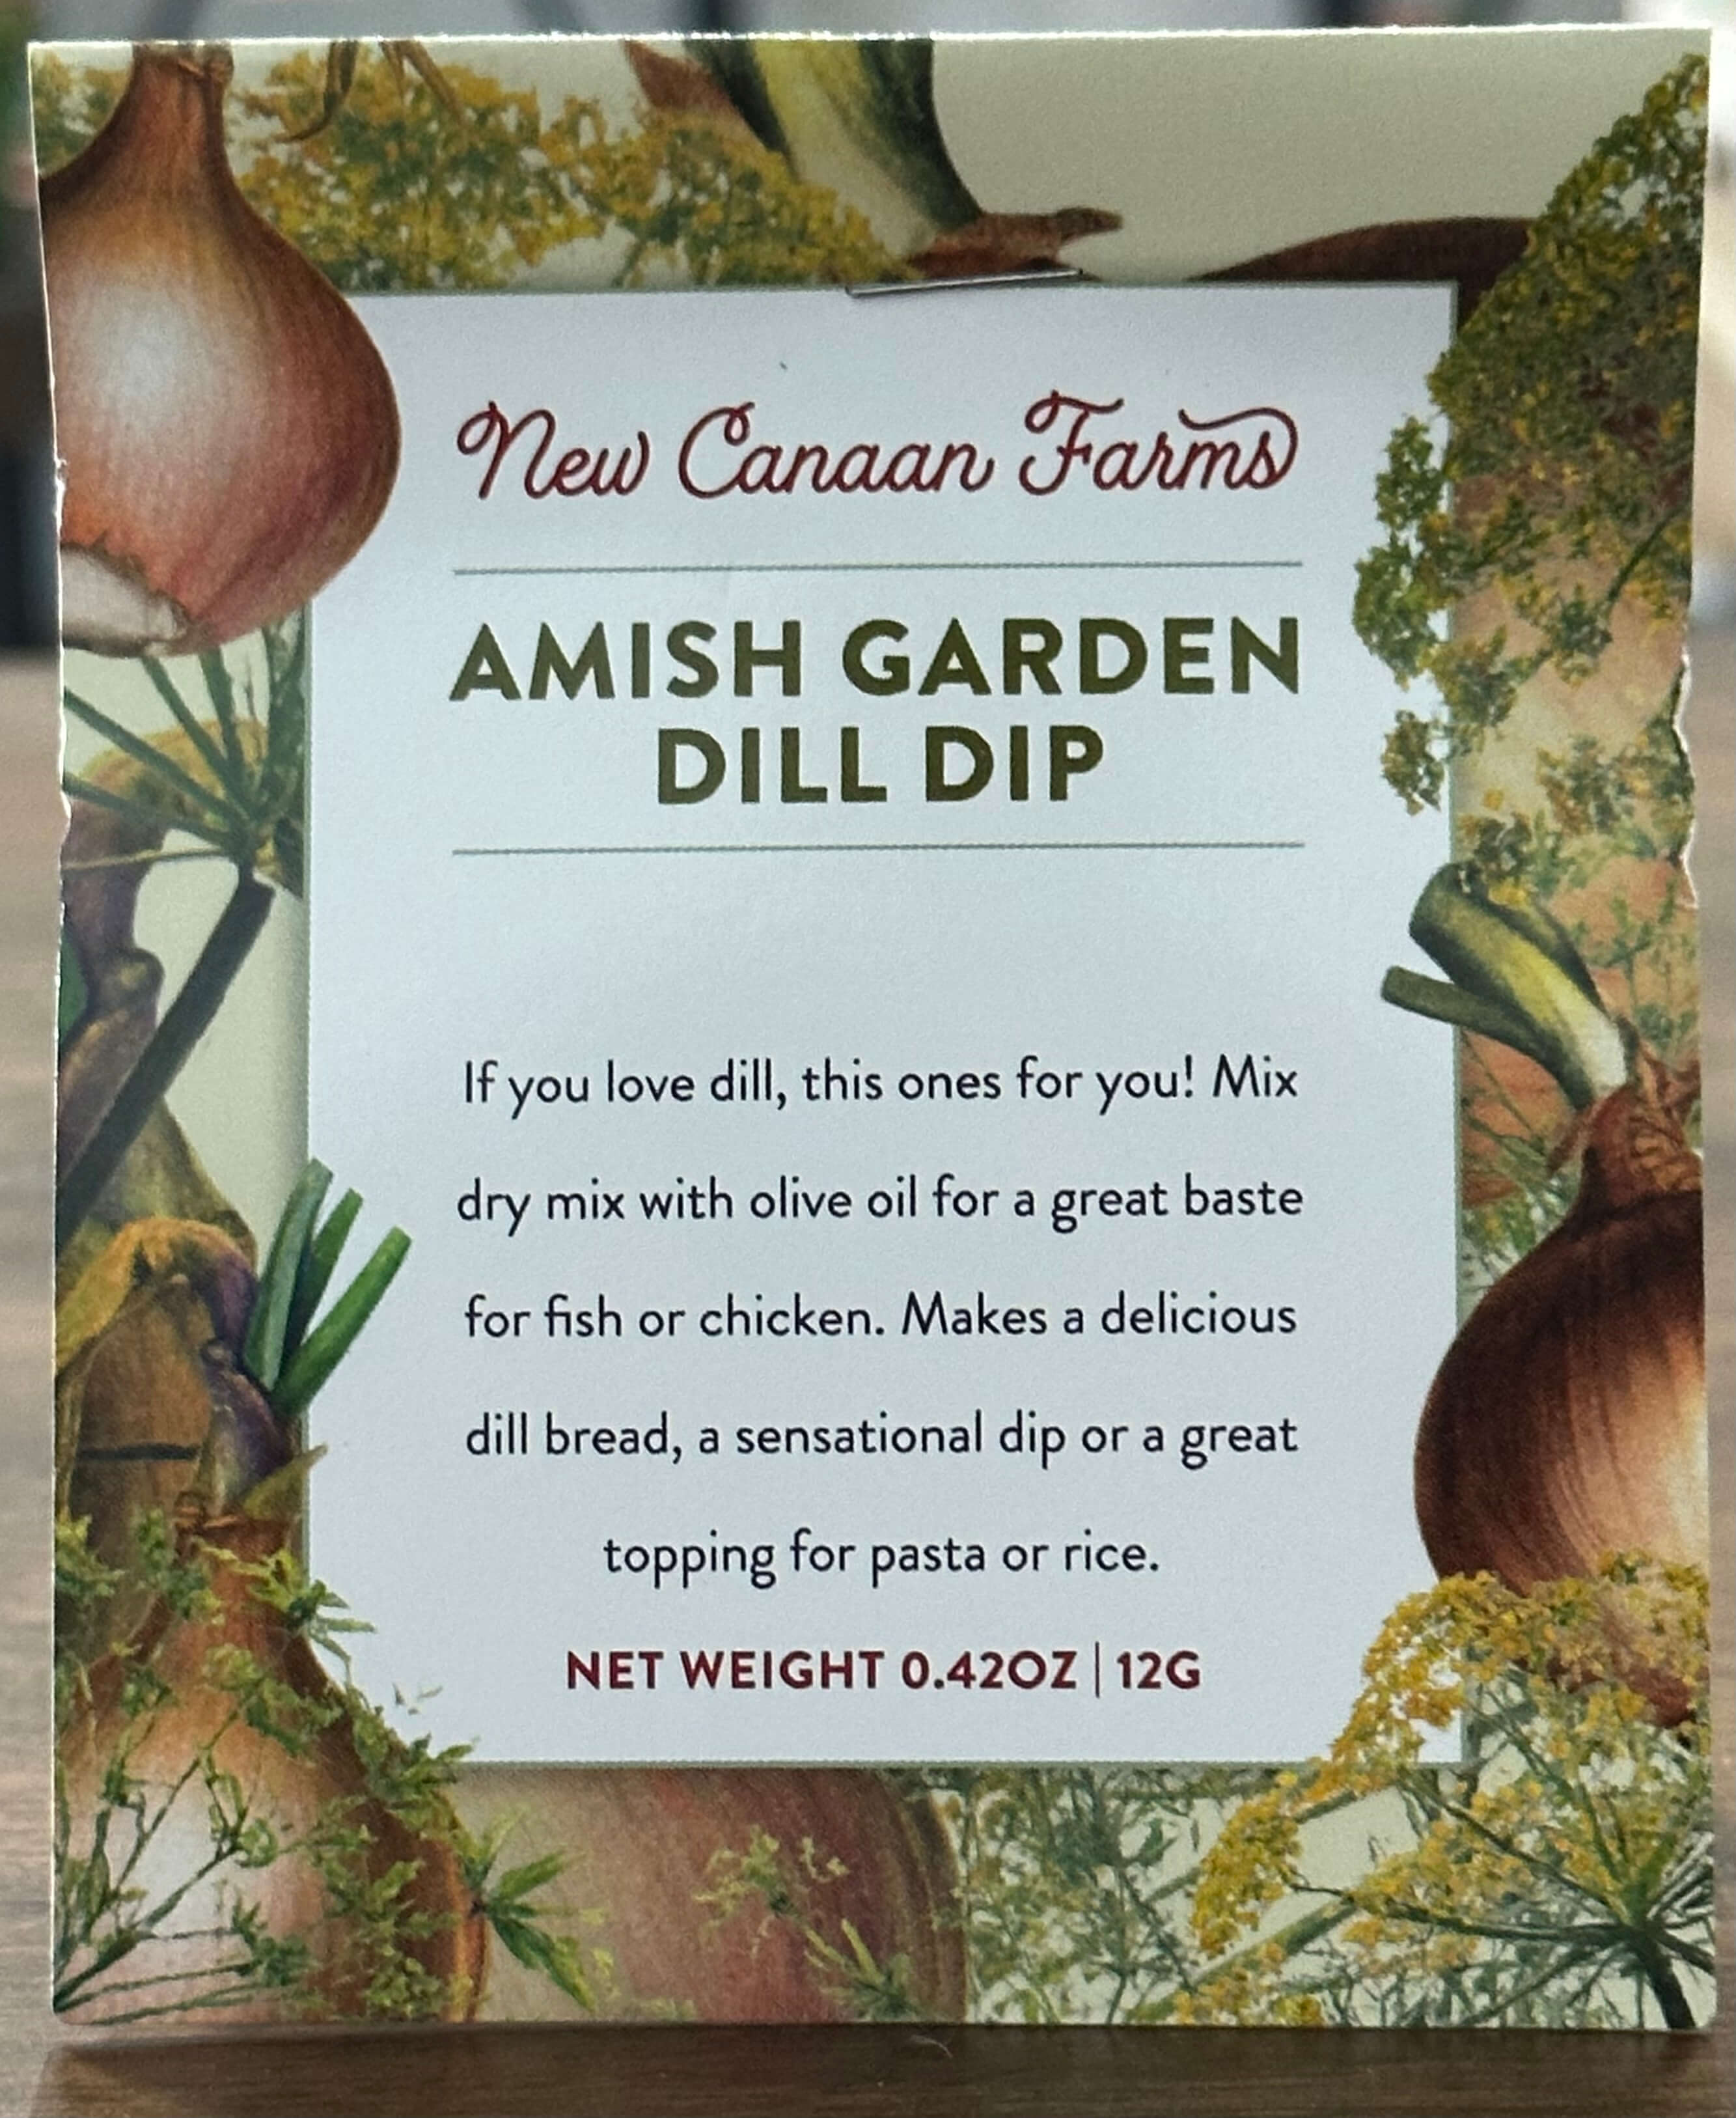 New Canaan Farms Amish Garden Dill Dip in a sealed pouch.